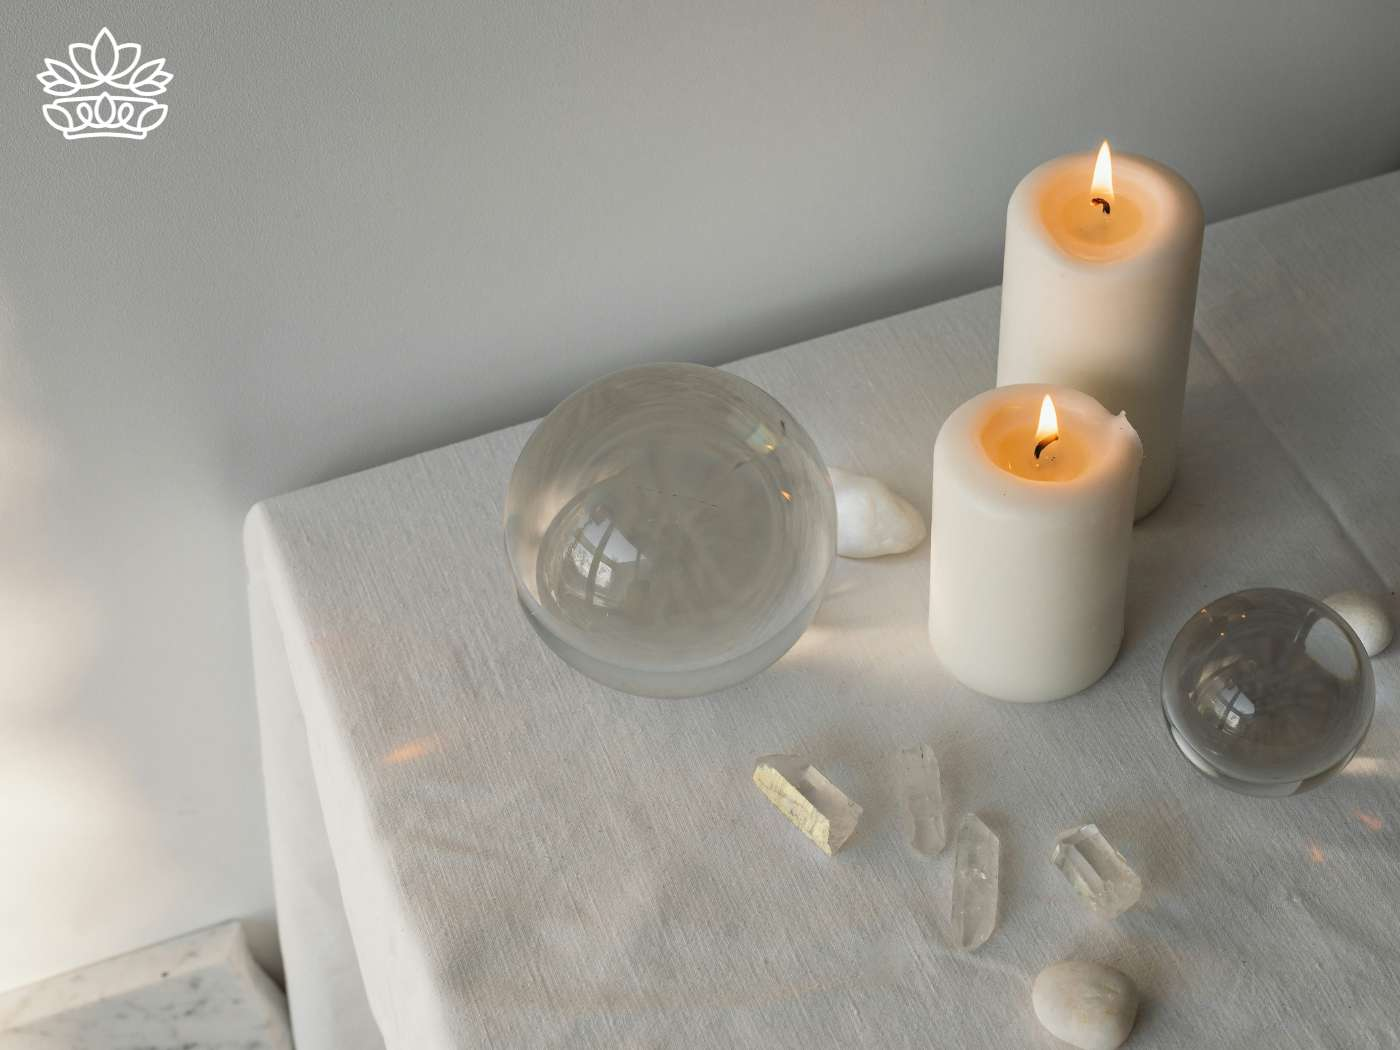 A tranquil setting featuring lit pillar candles alongside spherical glass accents and scattered quartz pieces, casting a warm glow over the tableau, part of the Candles Collection - Fabulous Flowers and Gifts.